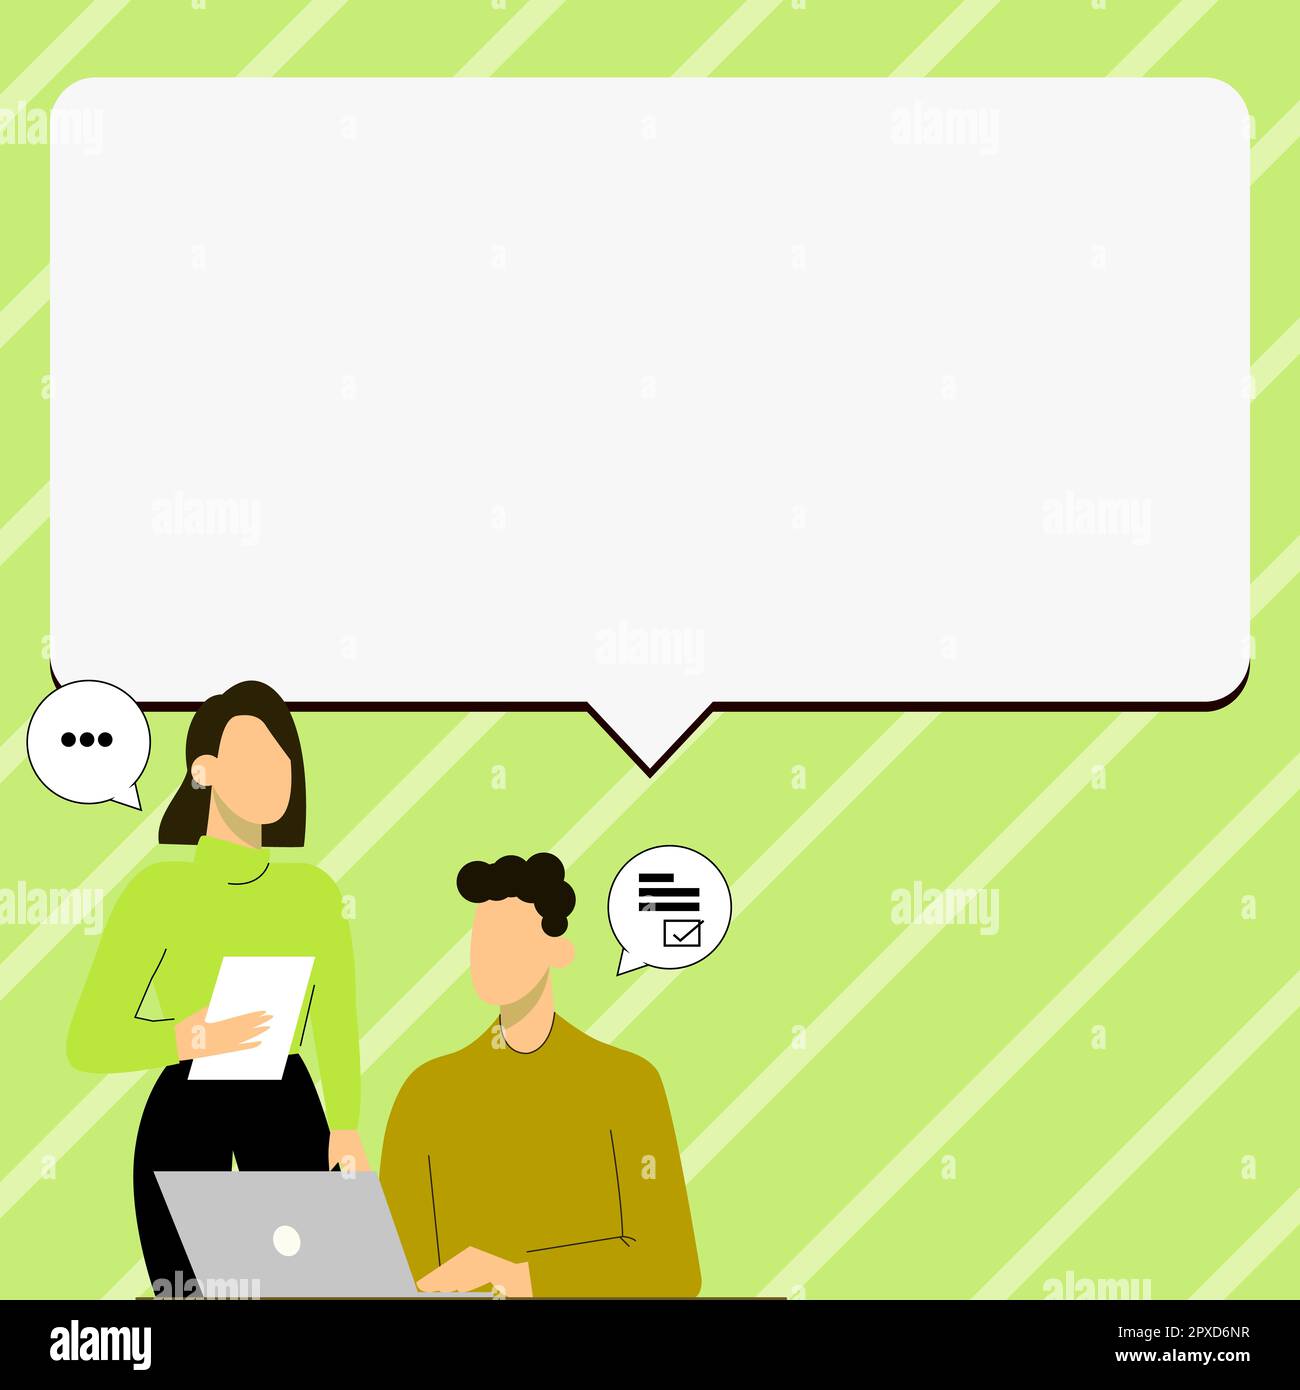 People discussing news. Big text holder on colored background with agenda. Stock Photo